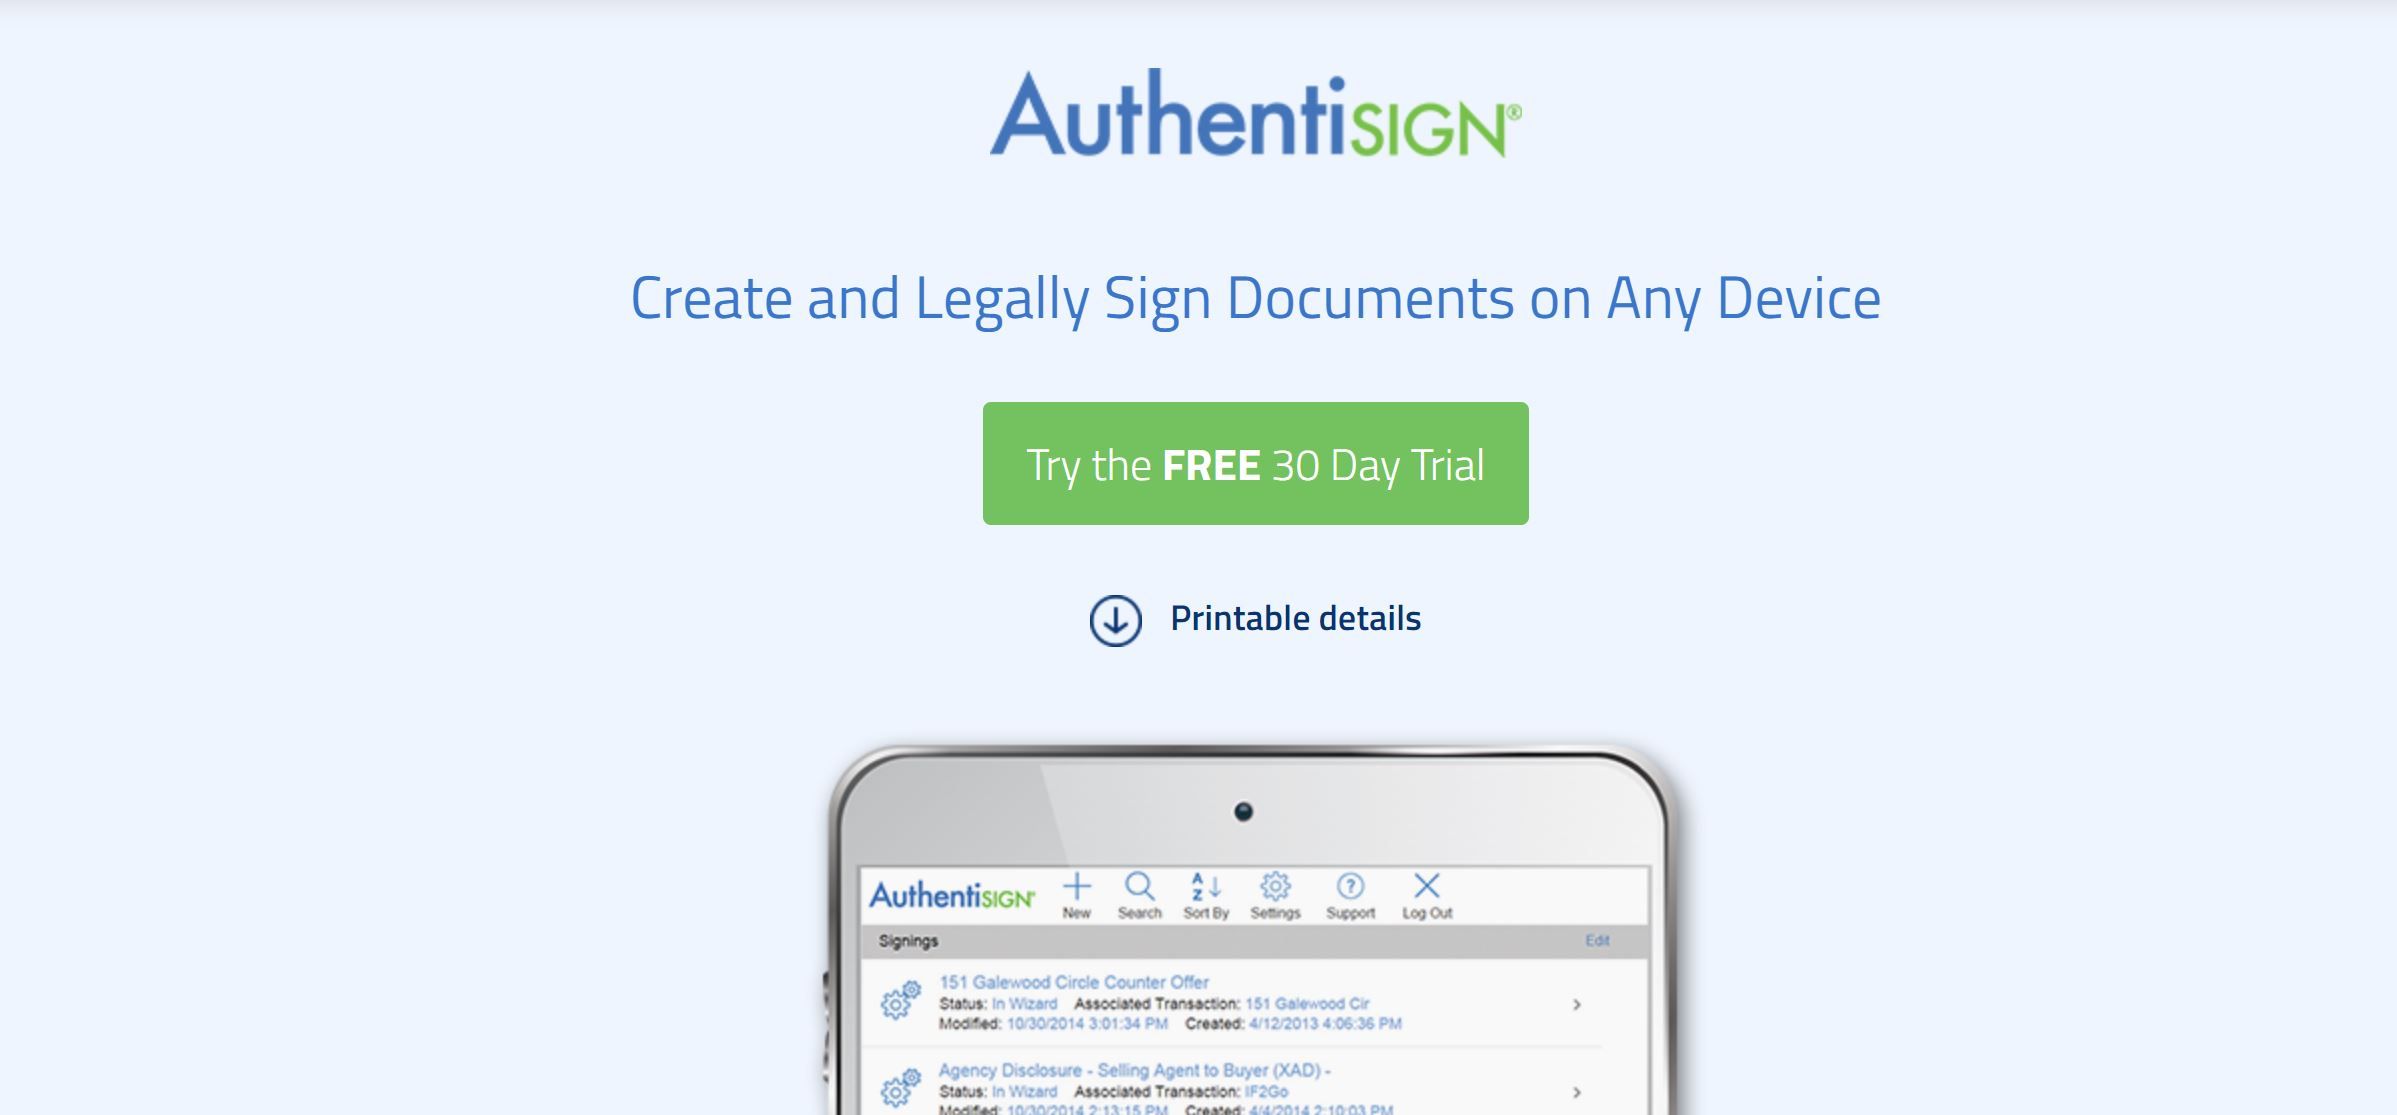 Authentisign Homepage